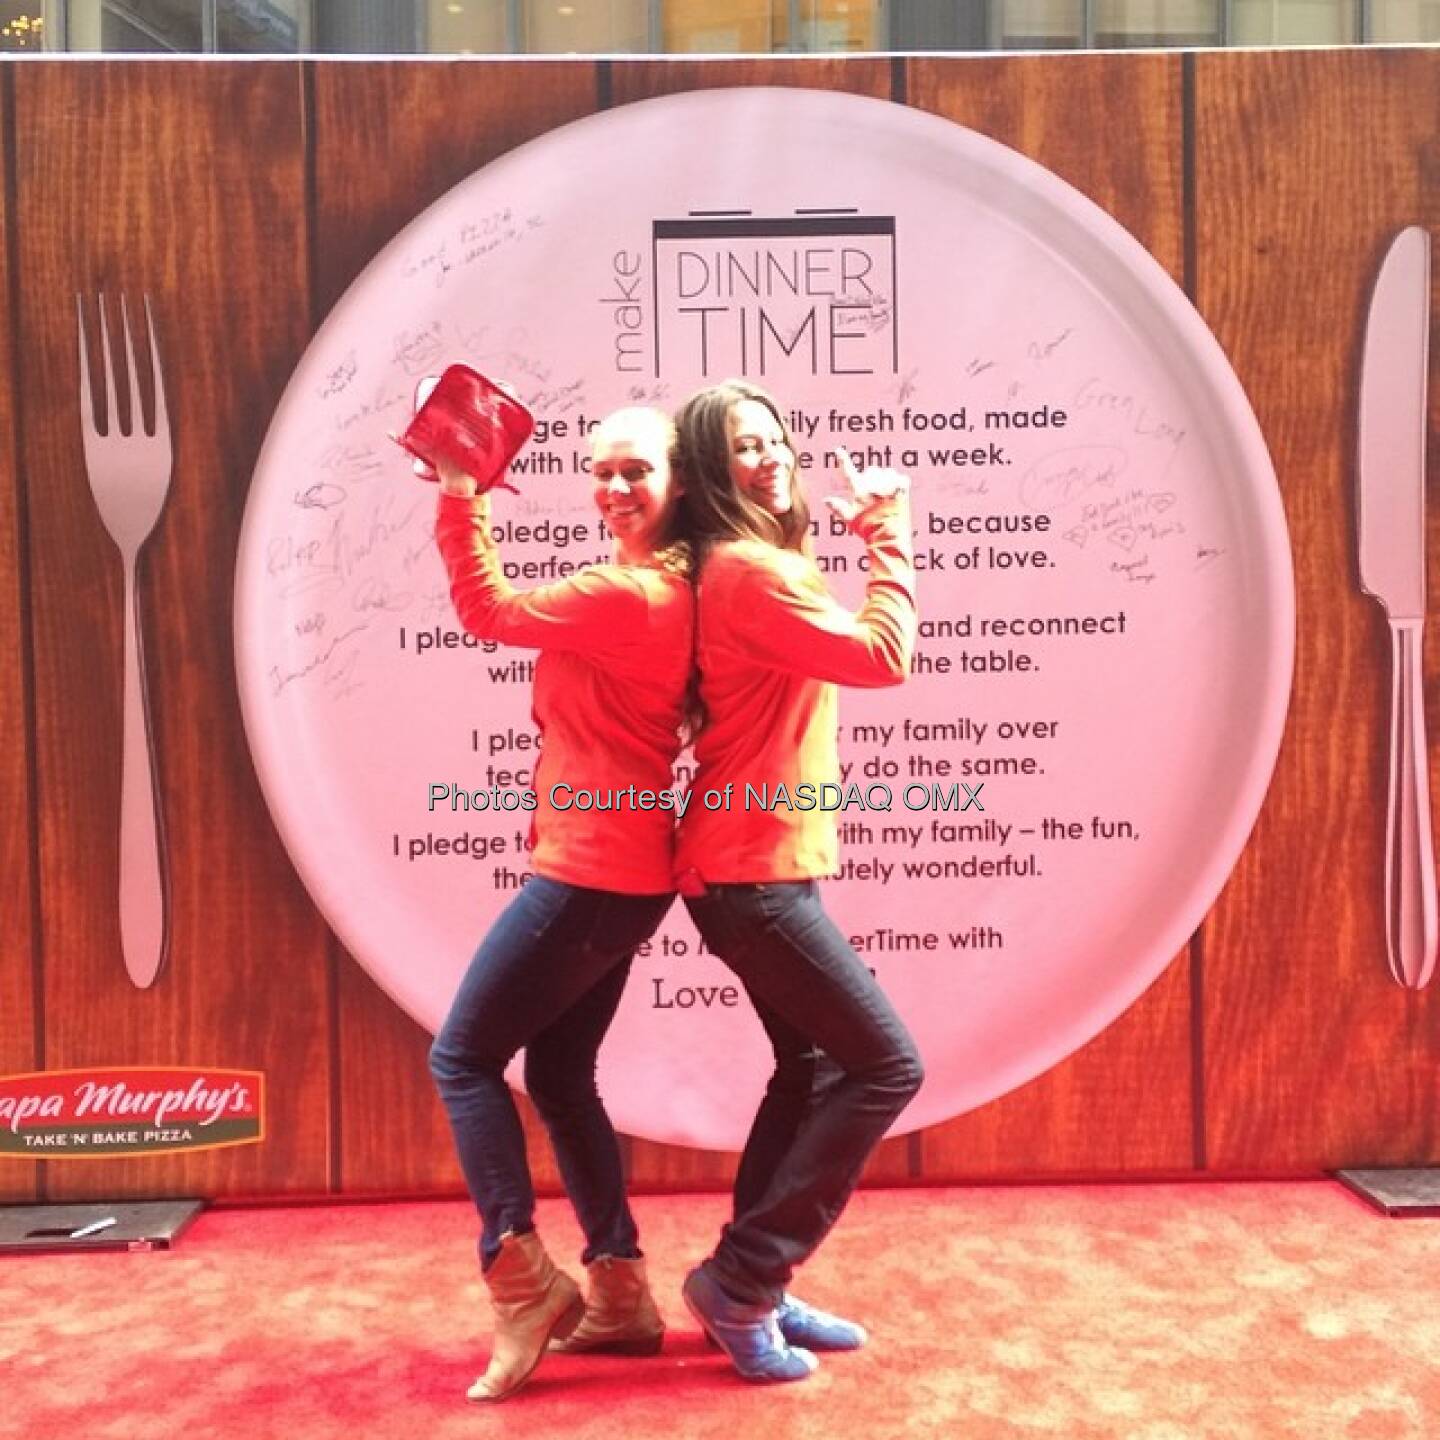 Essen - Papa Murphy's has an awesome outdoor display in #TimesSquare today! Source: http://facebook.com/NASDAQ